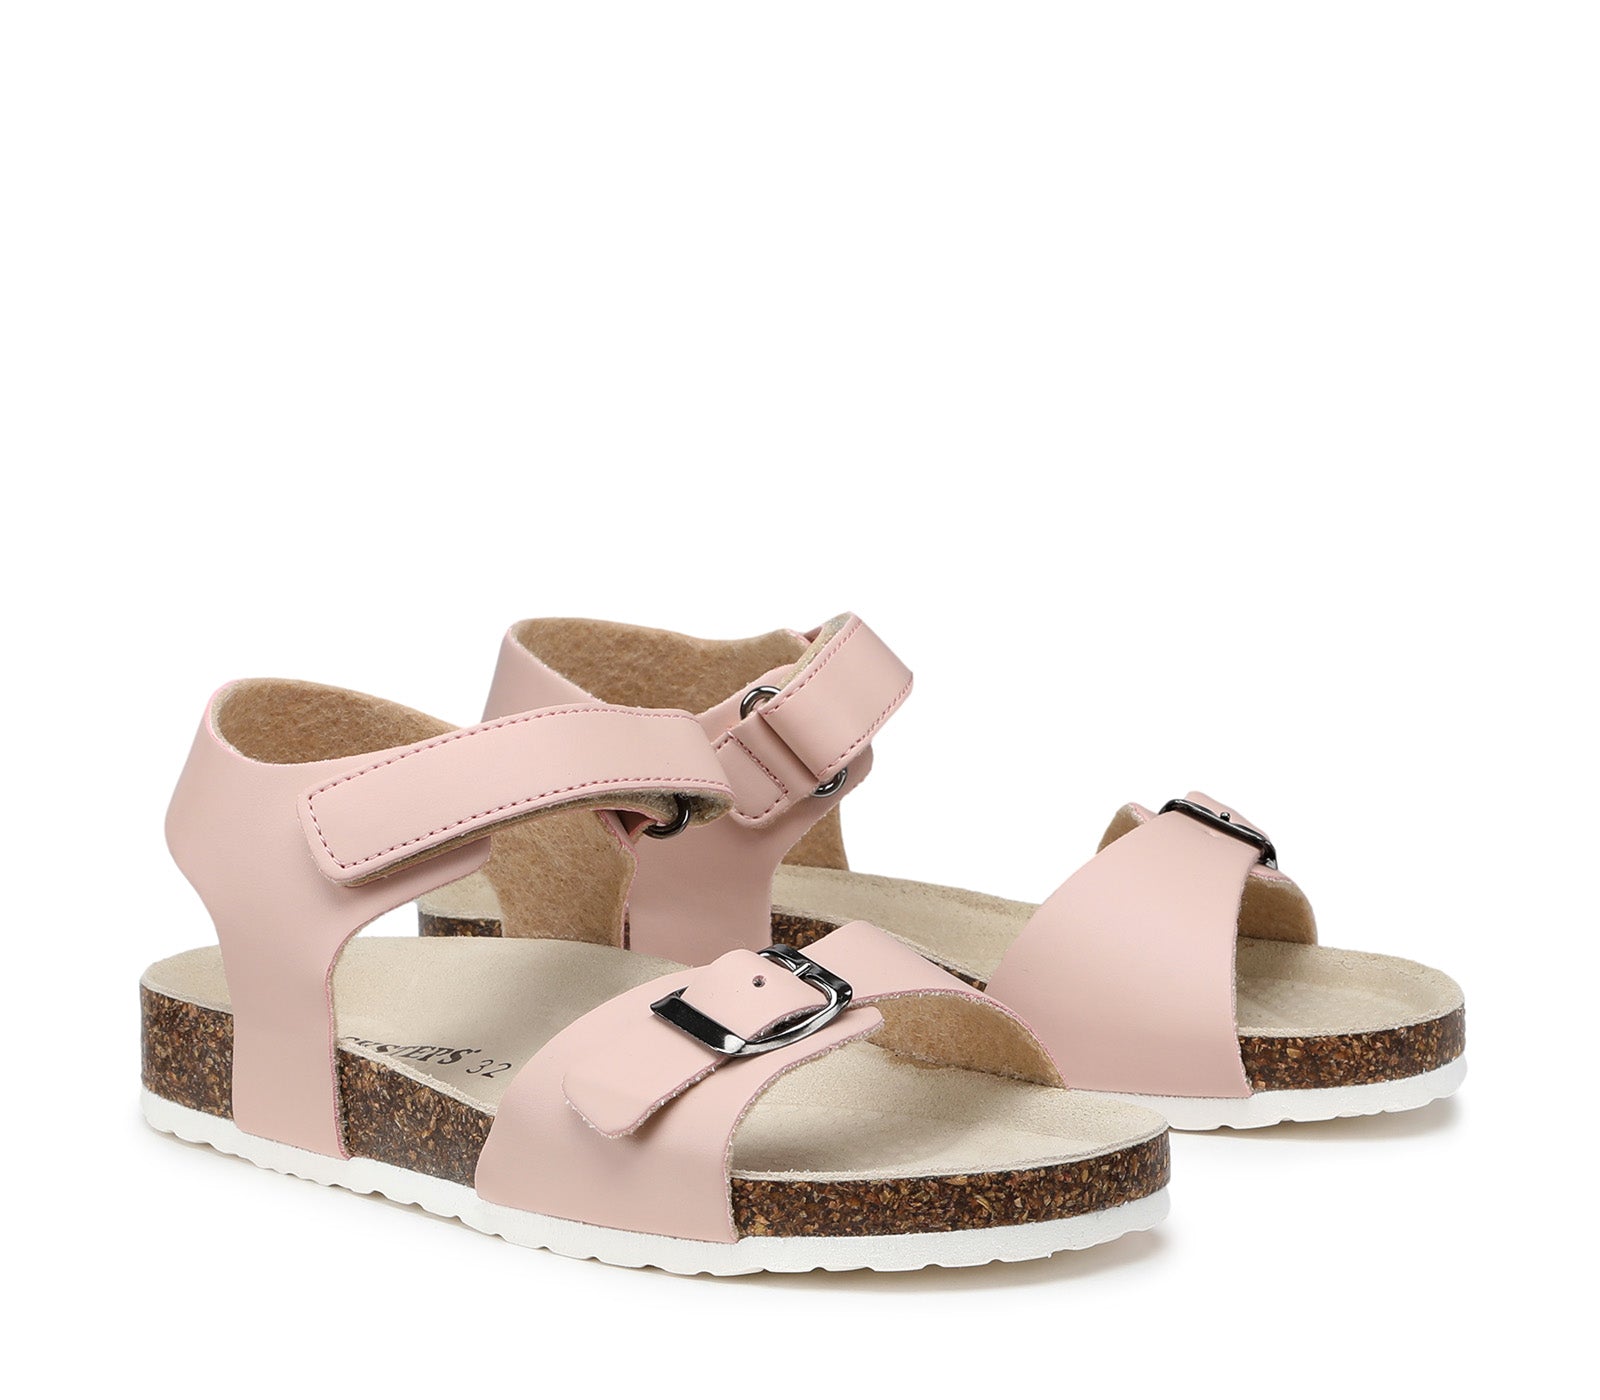 Pink Children's Sandals with Velcro Closure and Contoured Insole